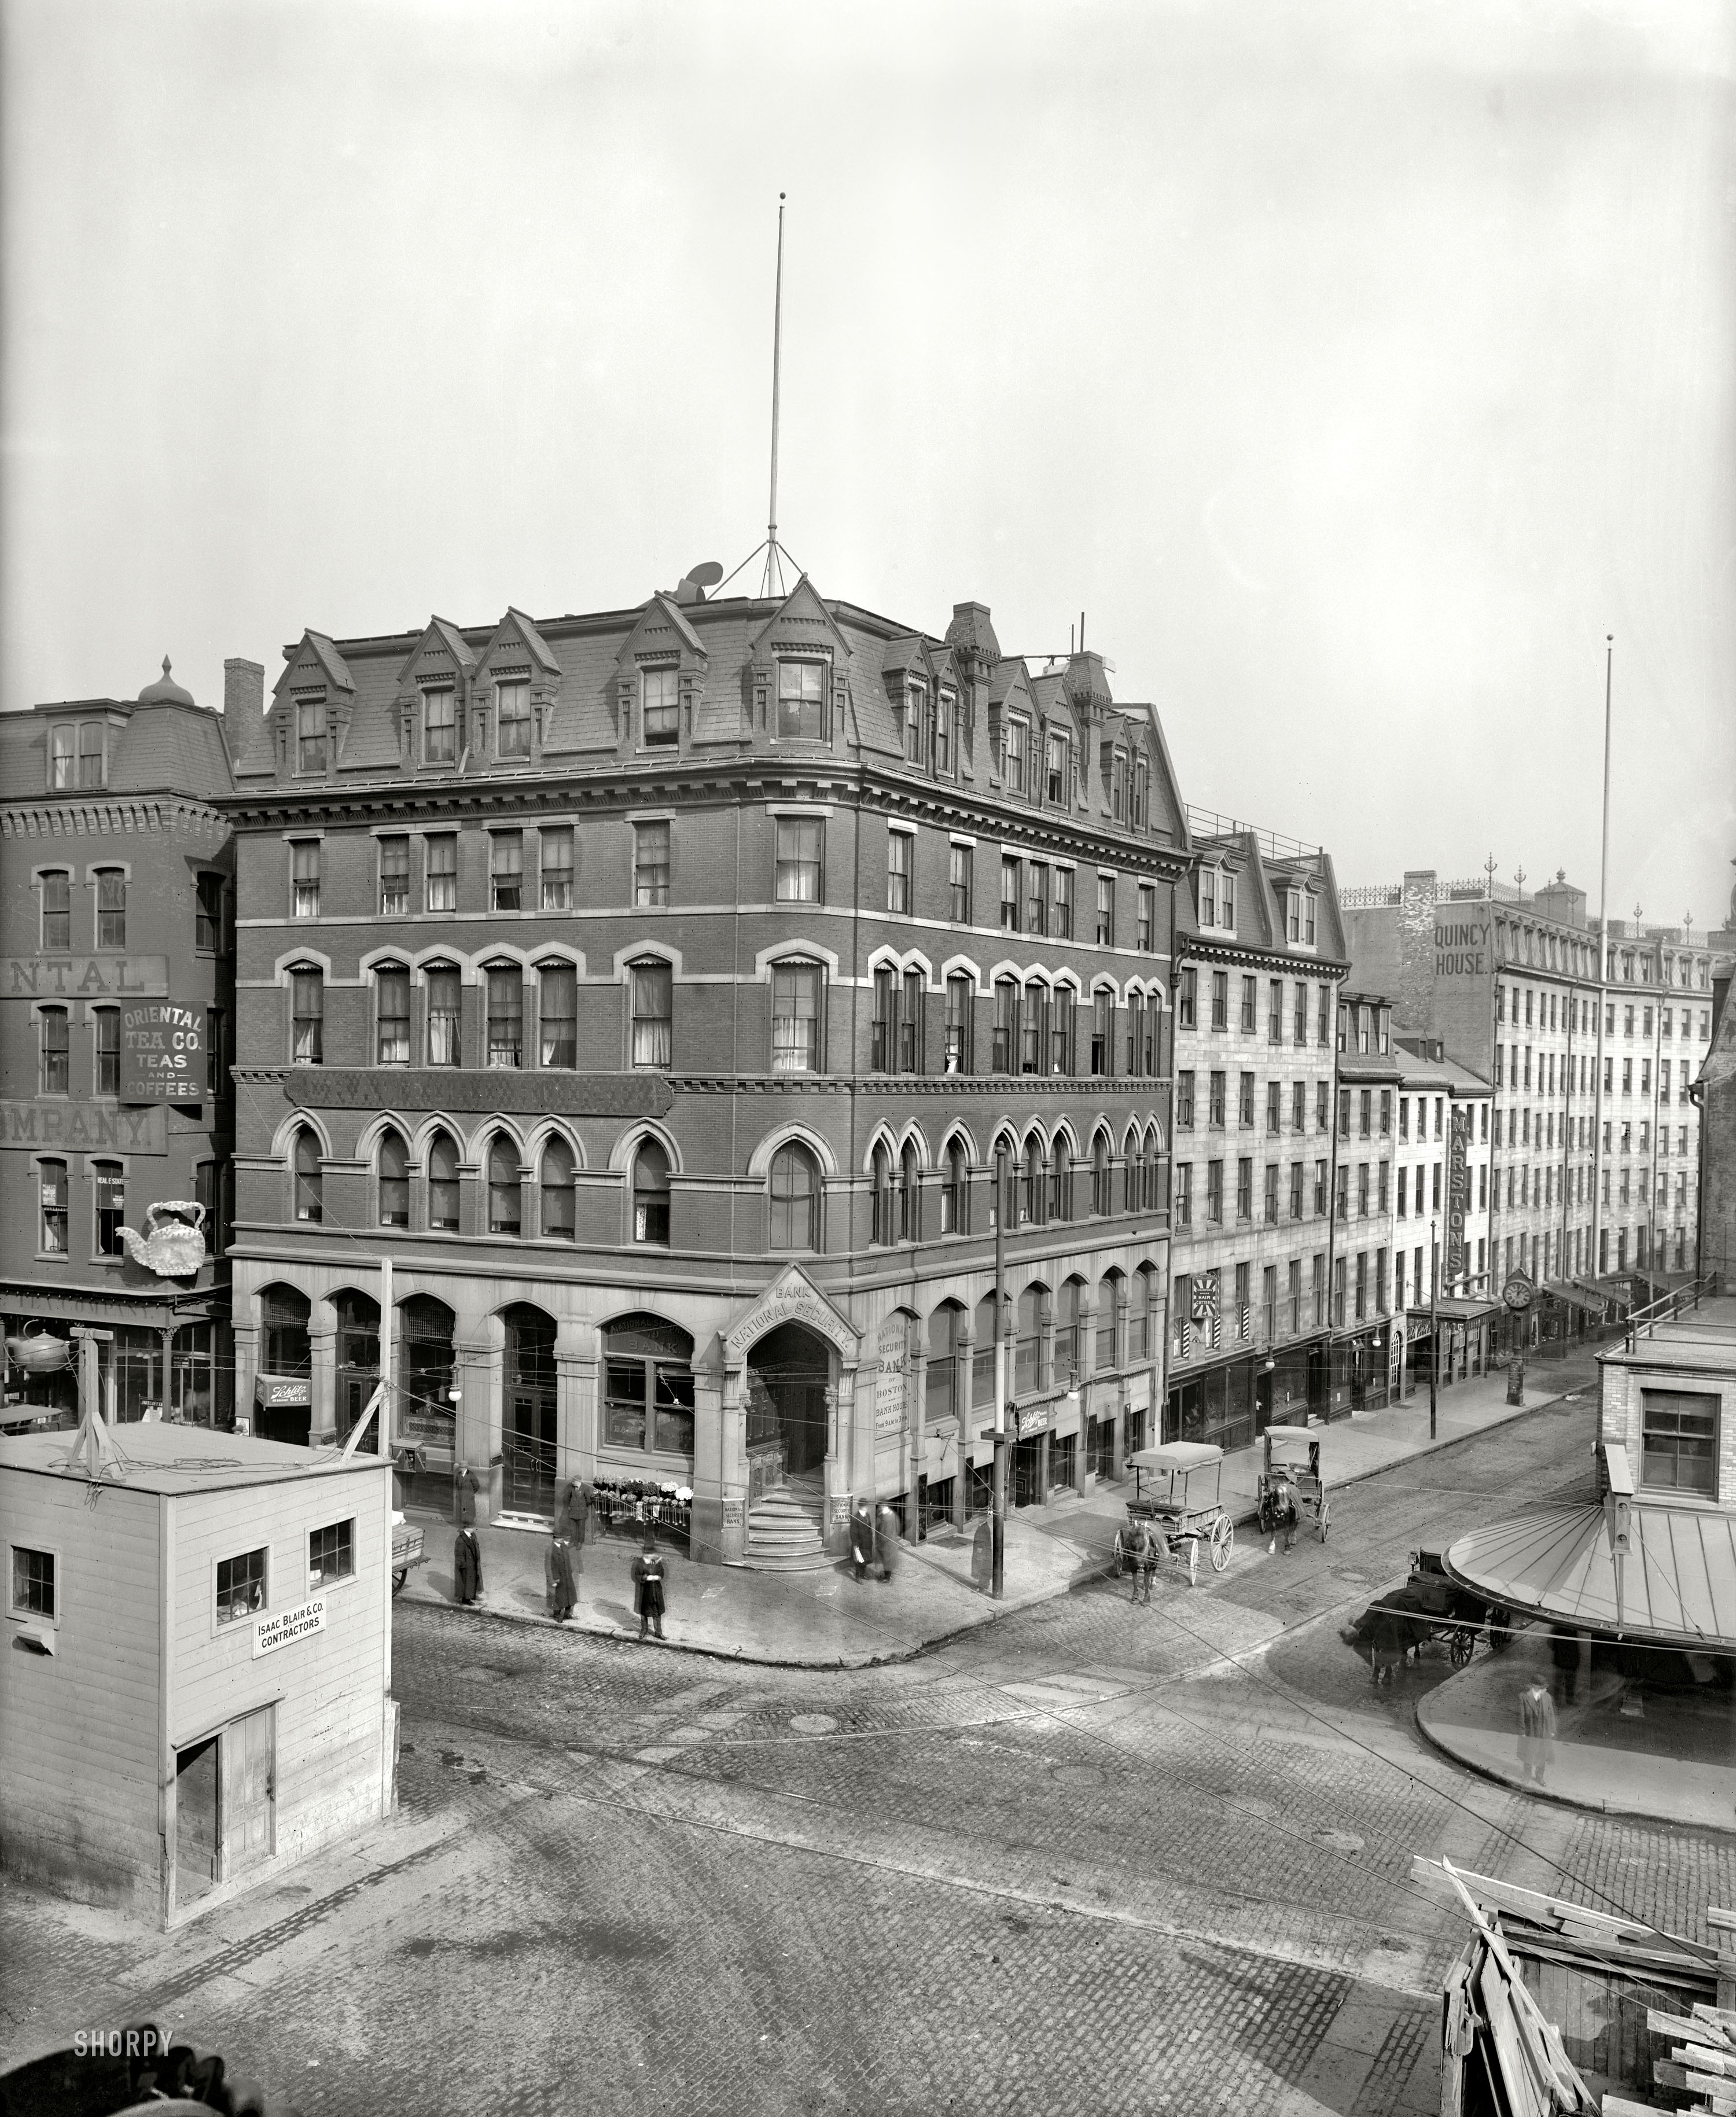 Boston, Mass., circa 1910. "Crawford House." Plus: Schlitz, big teapots and an early payphone. 8x10 glass negative, Detroit Publishing Co. View full size.